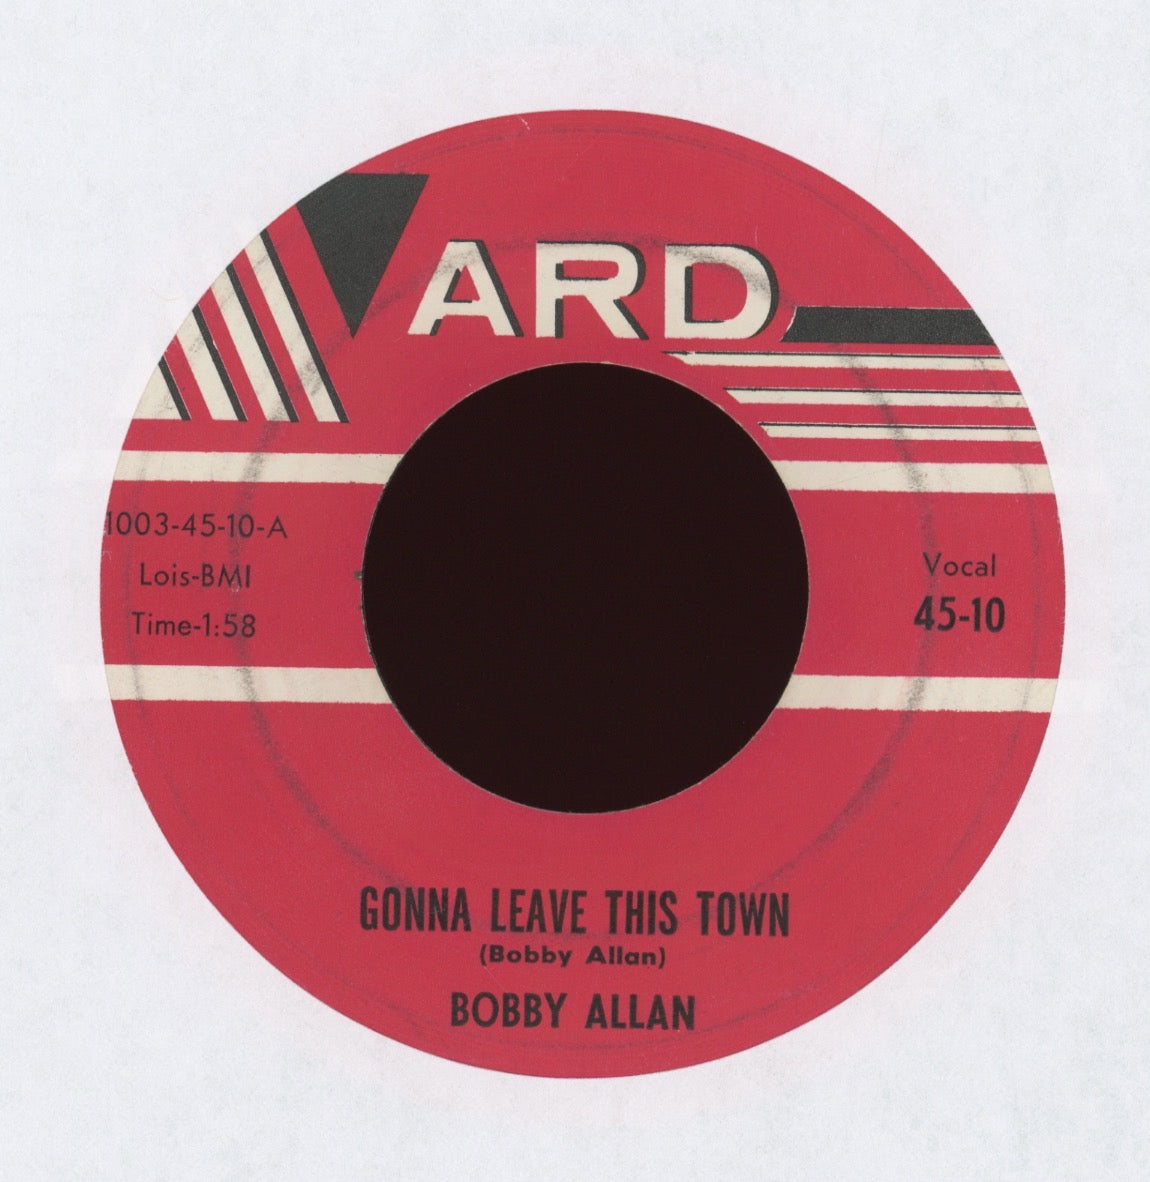 Bobby Allan - Gonna Leave This Town on ARD R&B Popcorn 45